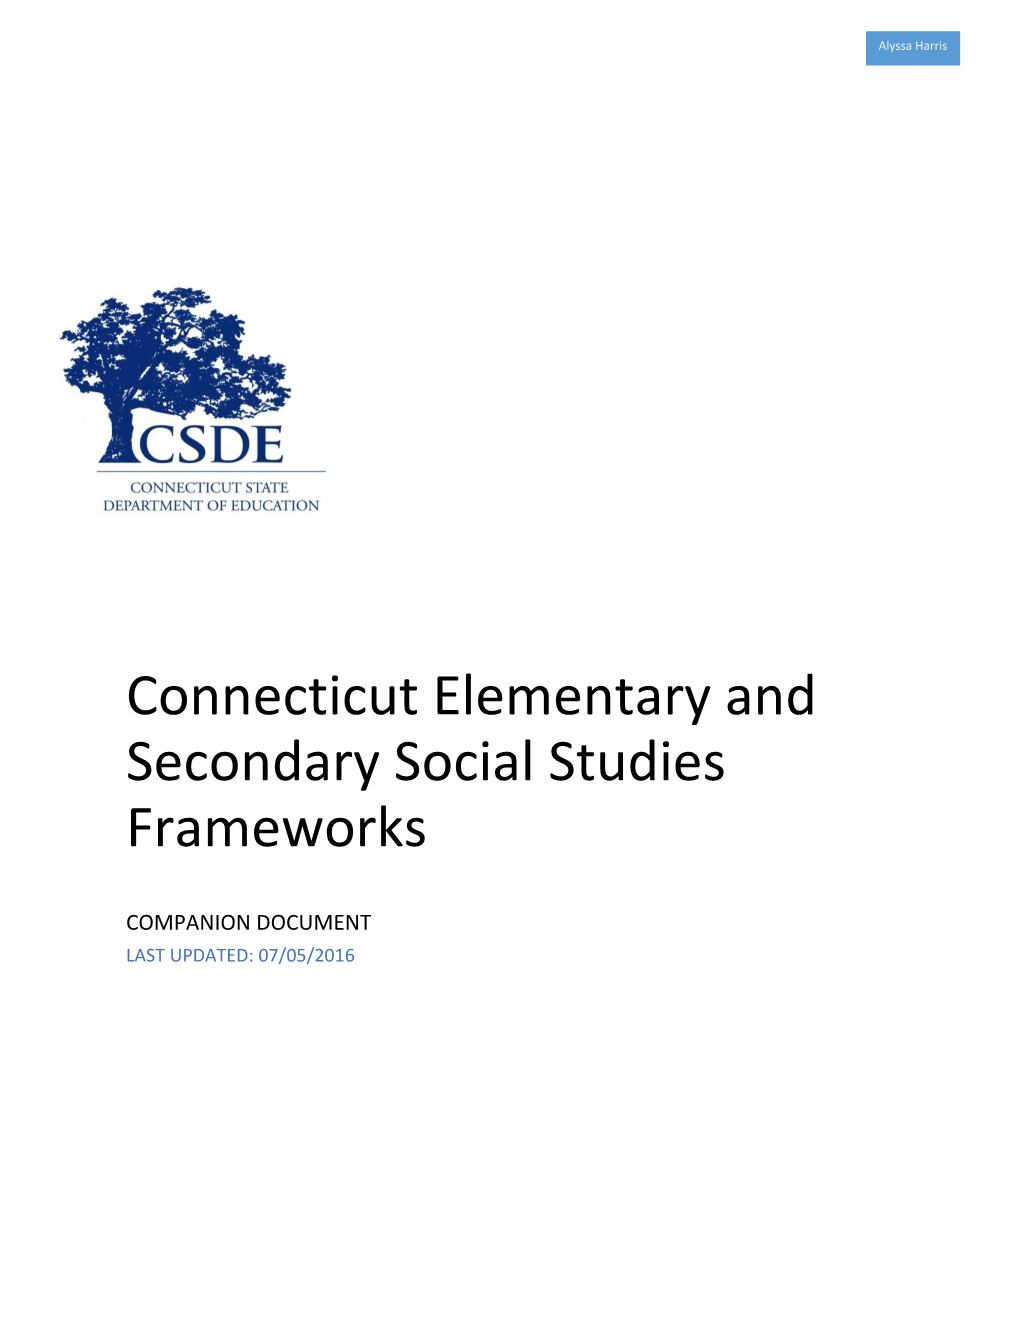 Connecticut Elementary and Secondary Social Studies Frameworks